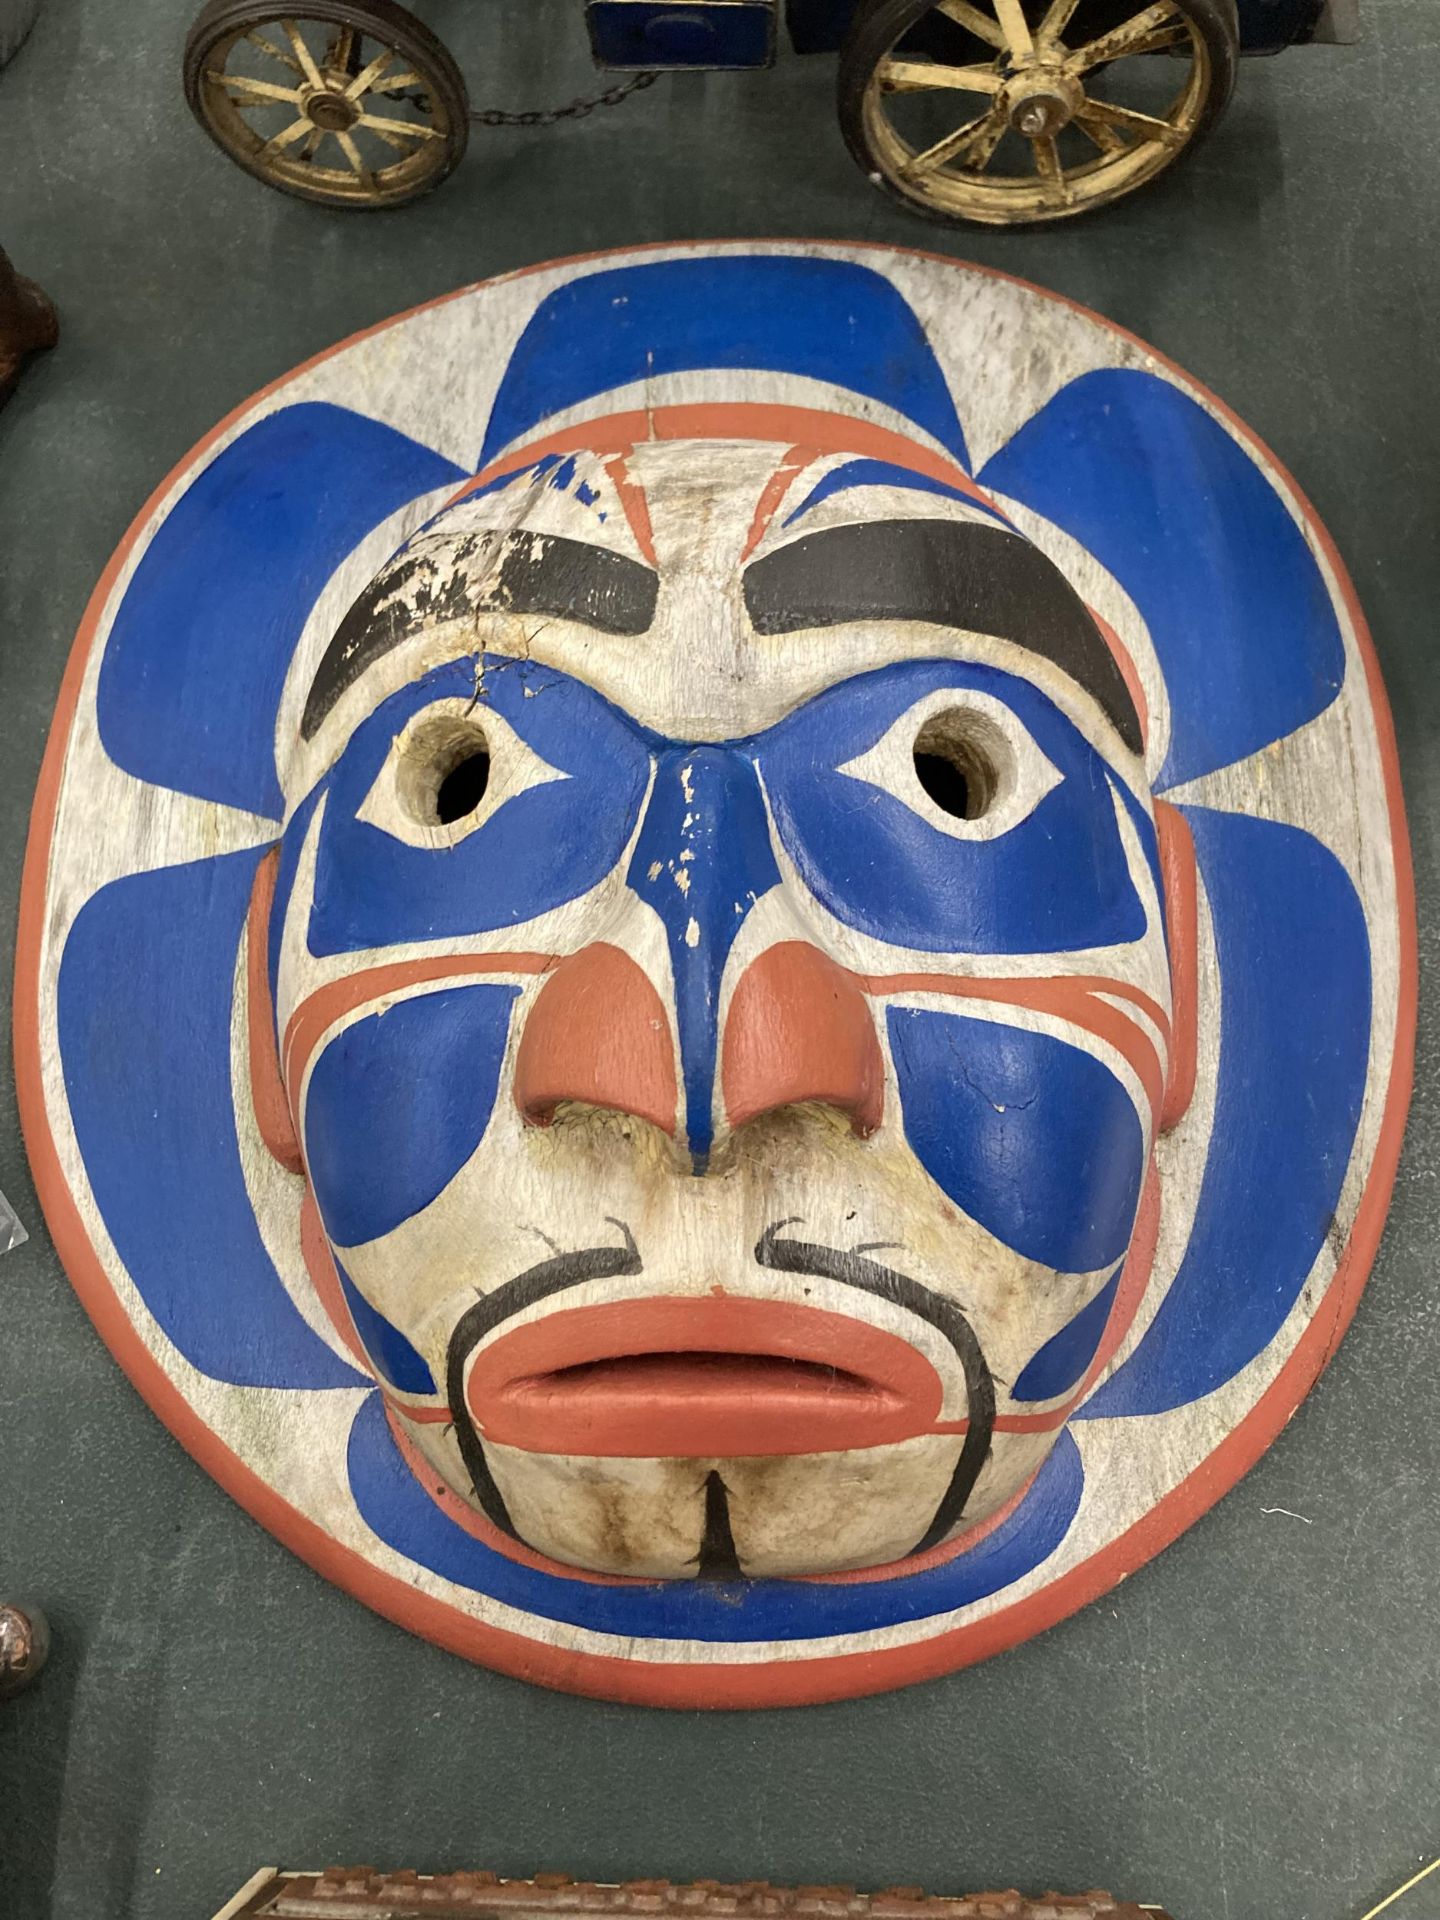 A CARVED WOODEN FACE MASK WITH RED, WHITE AND BLUE DESIGN